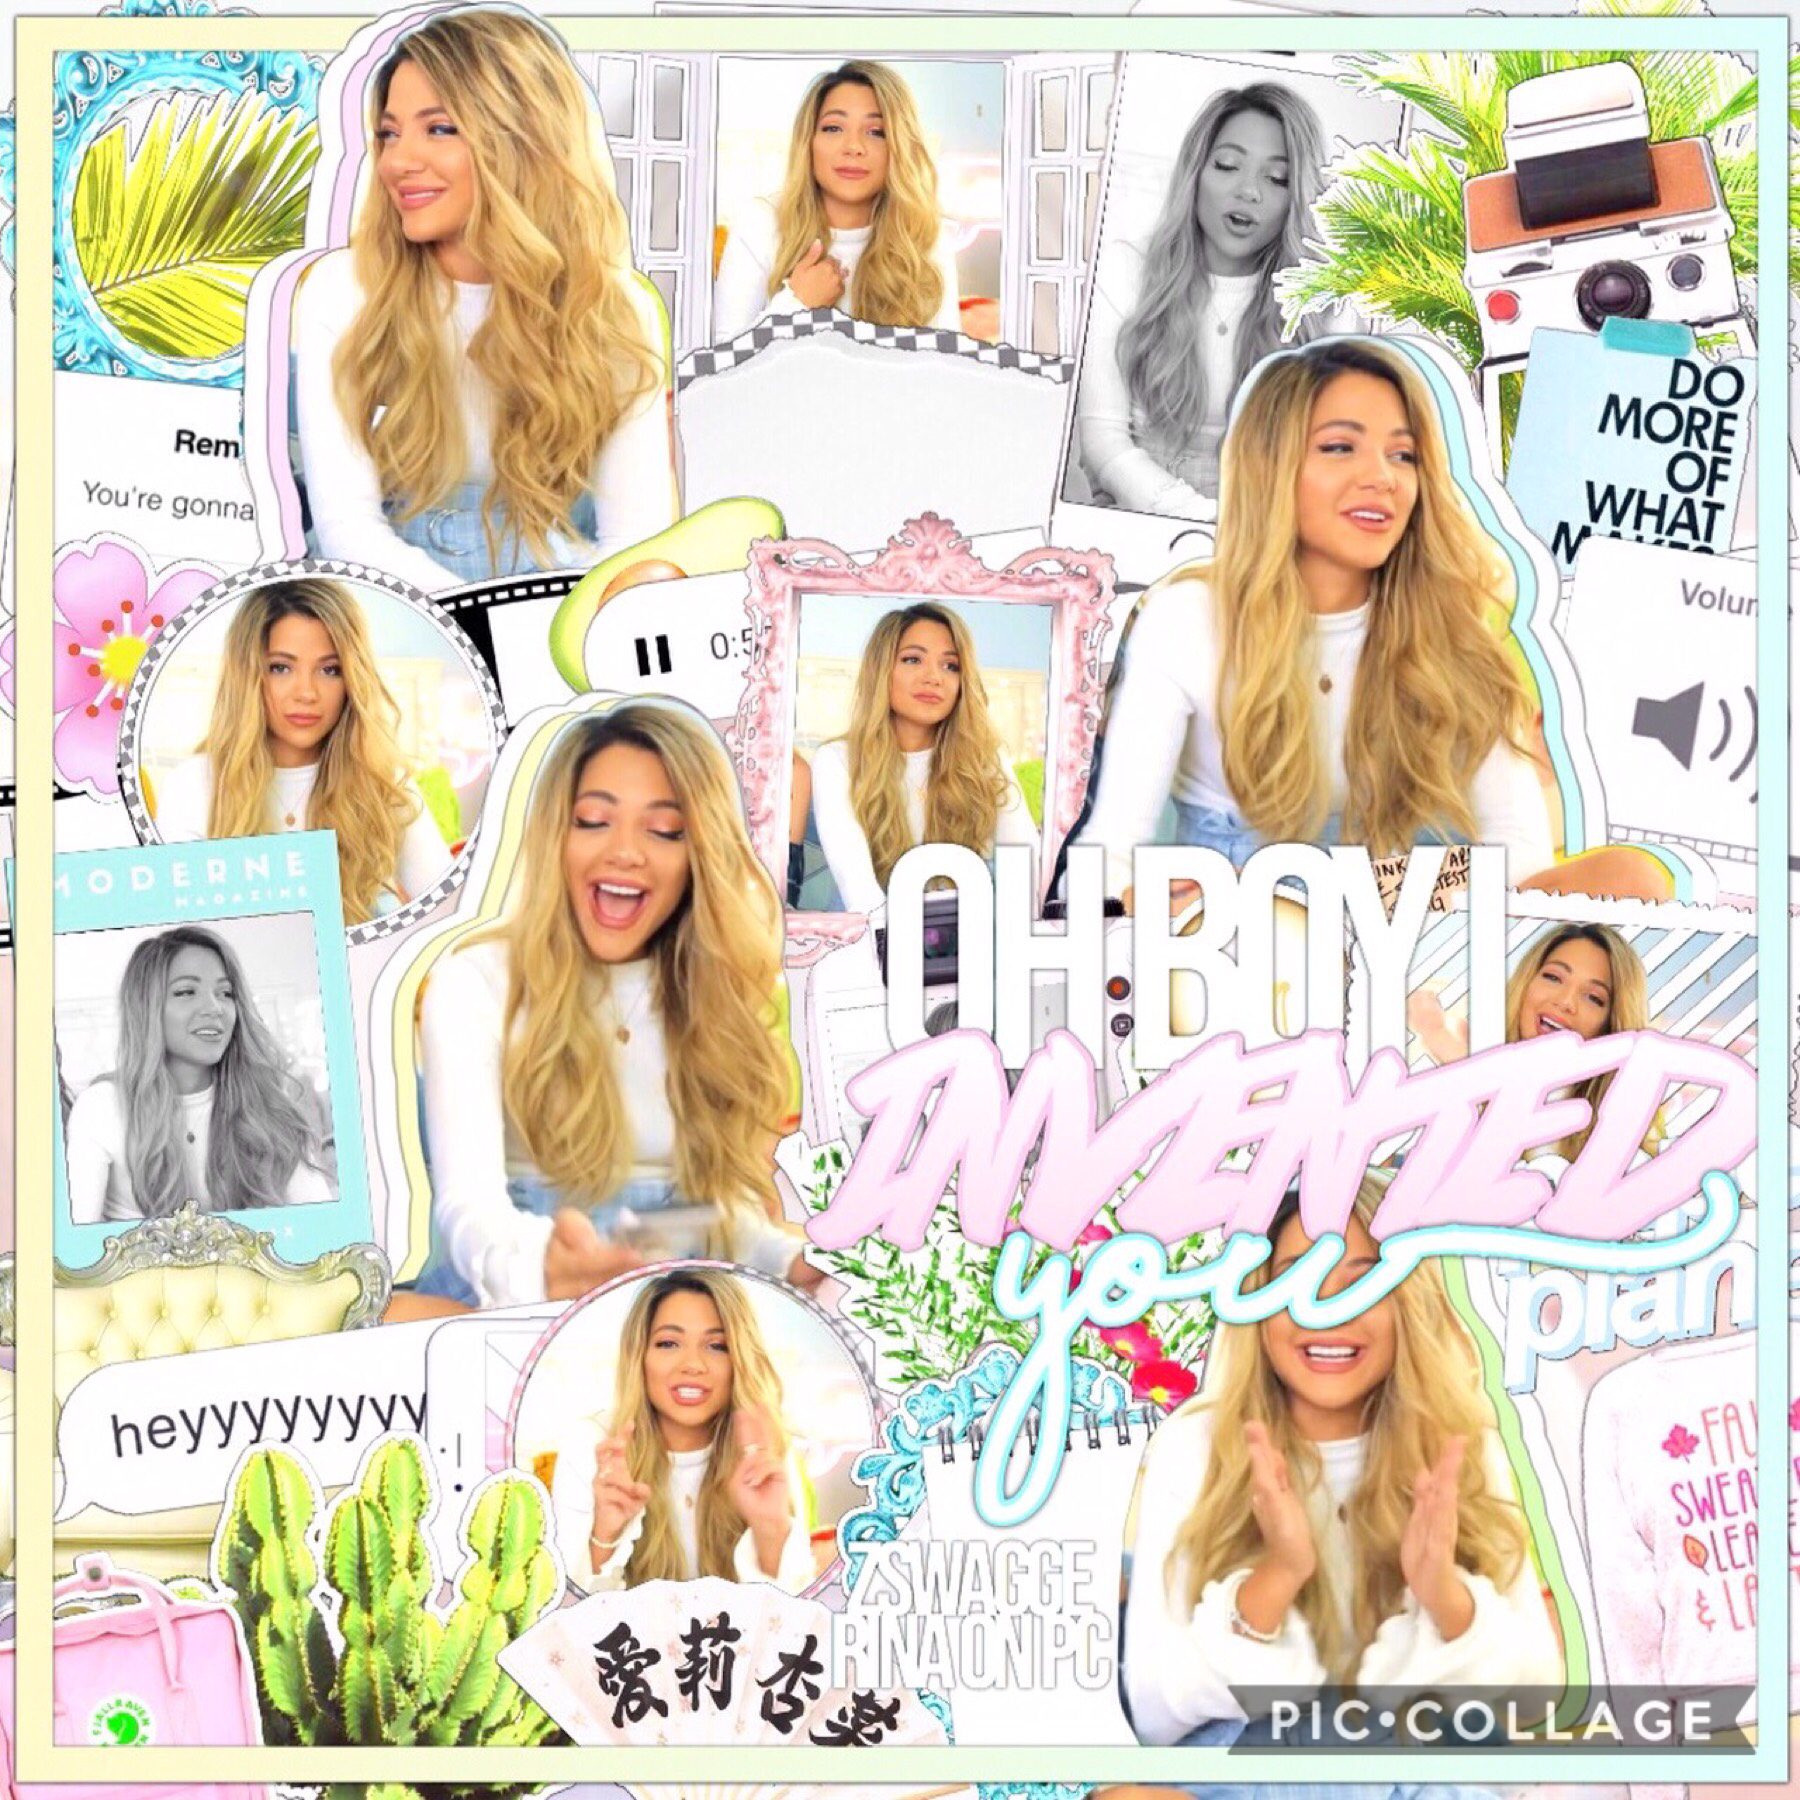 happy friYAY🌷 this is my favorite collage ever ✨🌱 even if I think I'm editing too much about gabi lol but I personally love her soo.. 😌 qotd: which book are you currently reading? 💘 aotd: little dictionary of fashion by c. dior 🌩